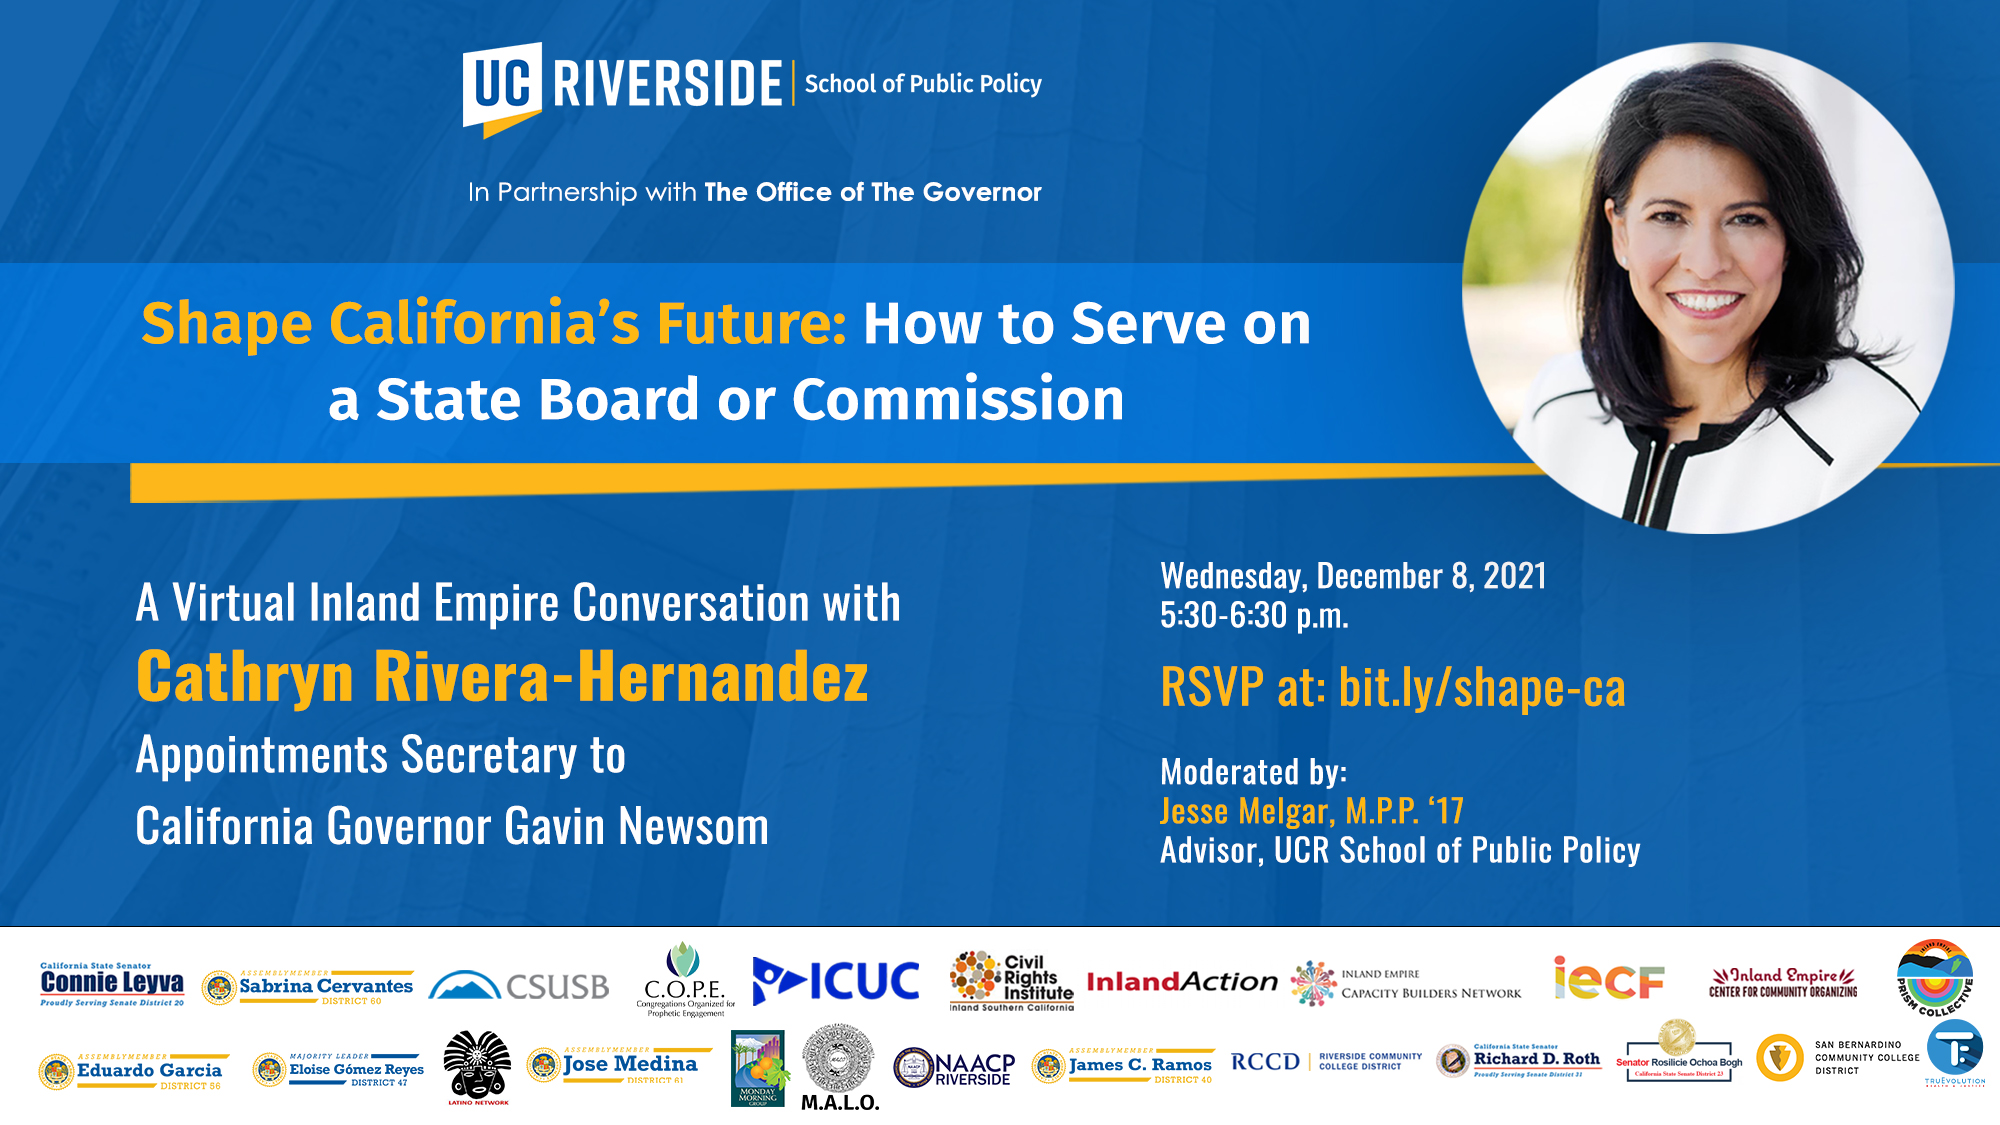 Blue graphic with text: UCR School of Public Policy and the Office of Governor Gavin Newsom for an Inland Empire conversation with the Governor’s Appointments Secretary Cathryn Rivera-Hernandez on Wednesday, December 8, at 5:30pm. RSVP at bit.ly/shape-ca